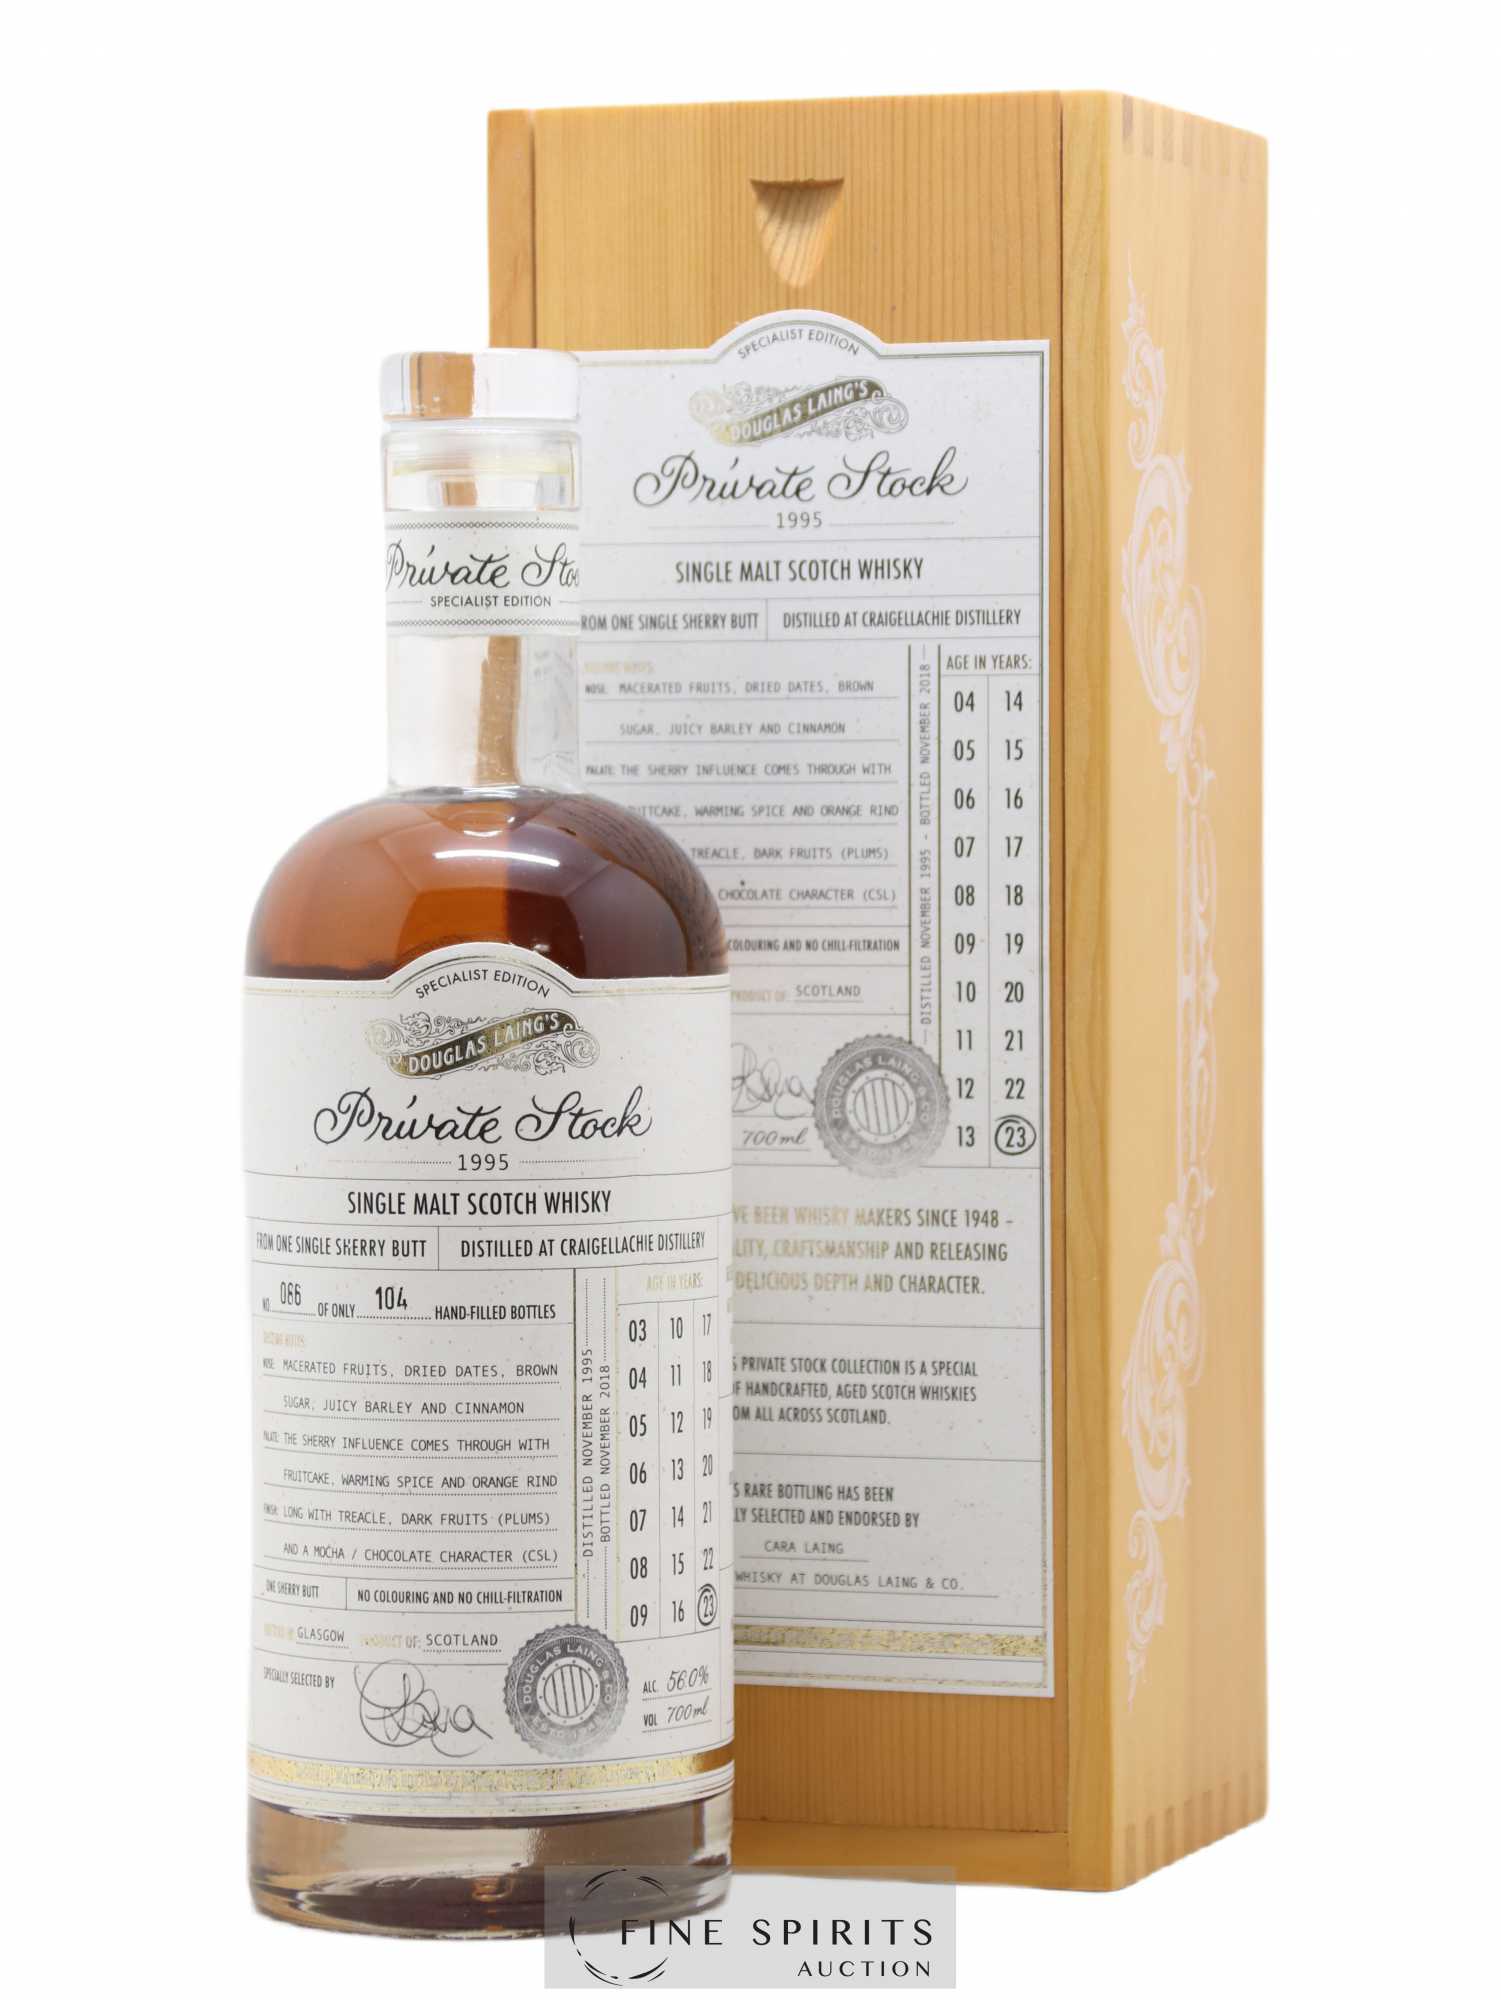 Craigellachie 23 years 1995 Douglas Laing Private Stock Single Sherry Butt - One of 104 - bottled 2018 Specialist Edition 